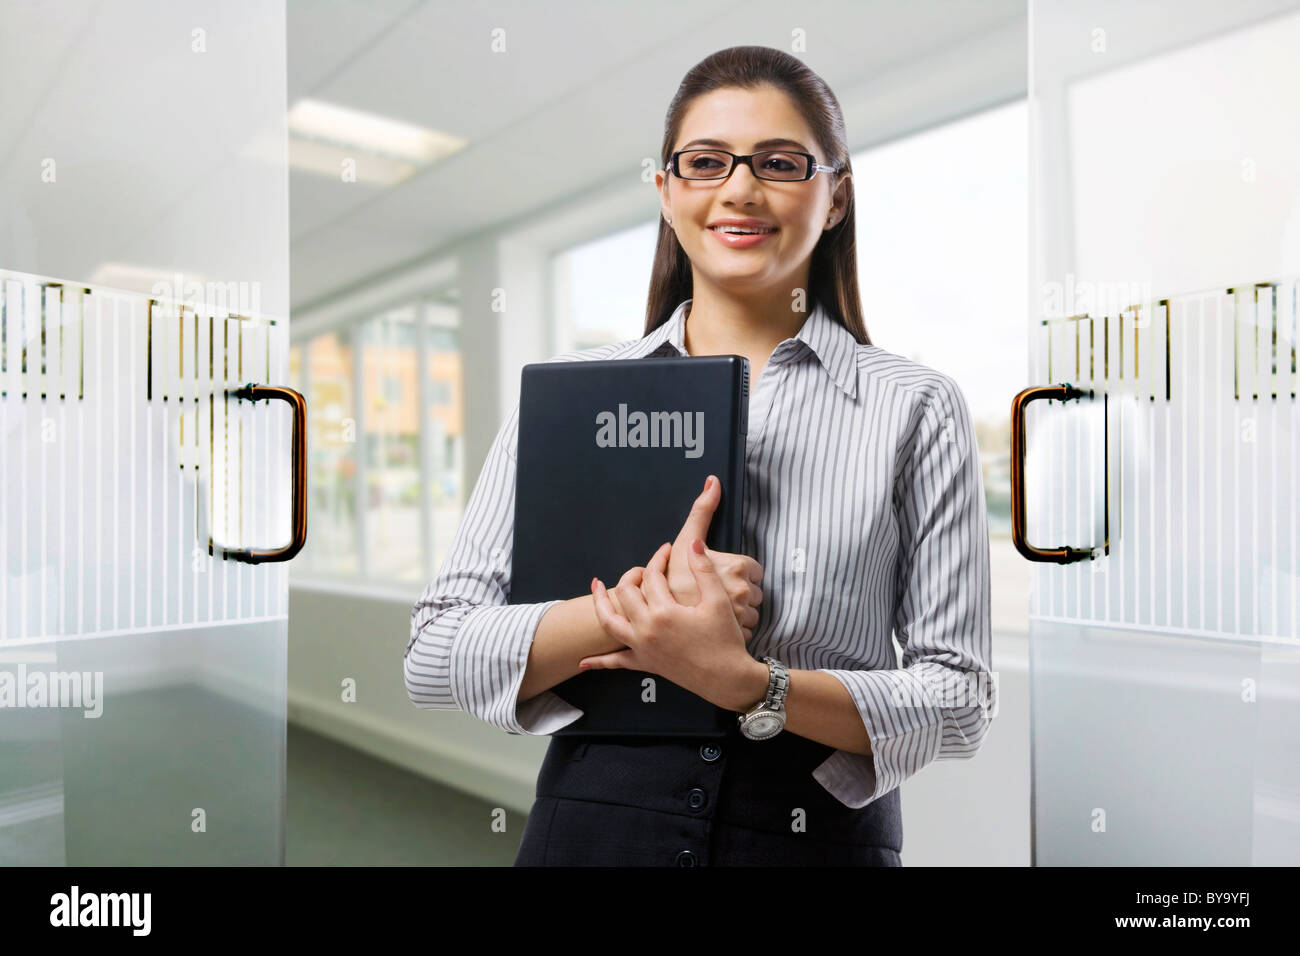 Secretary holding a laptop in the office Stock Photo